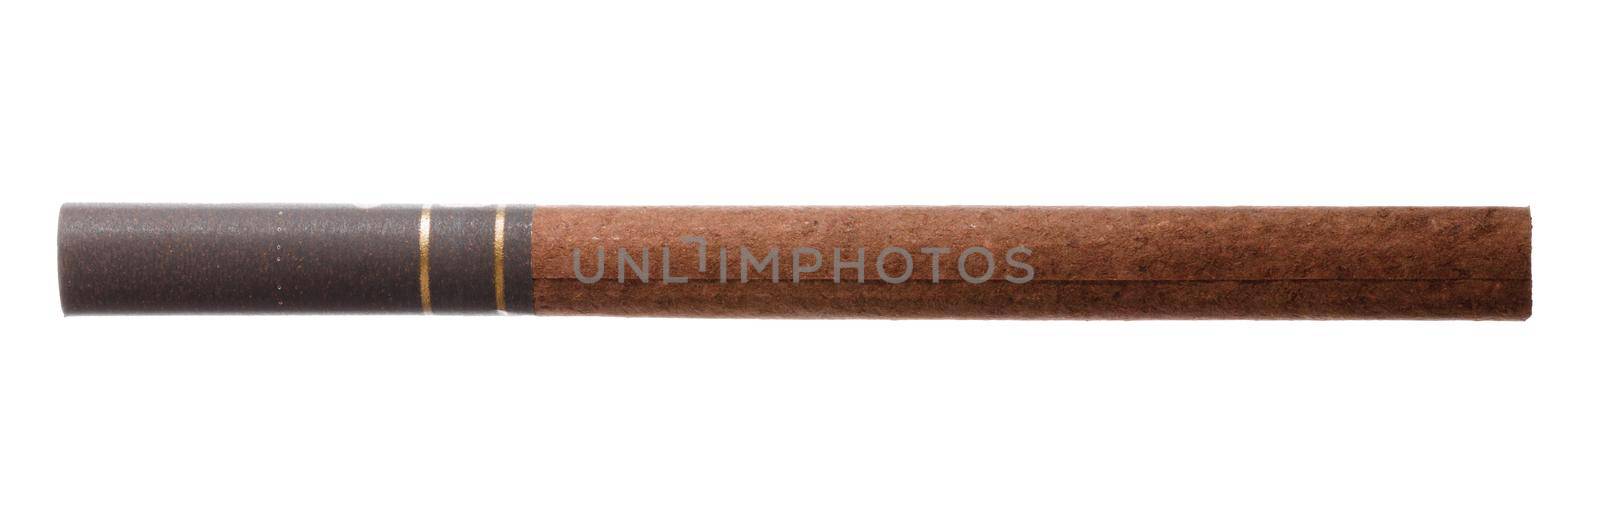 New cigarette with filter isolated on white by Fabrikasimf